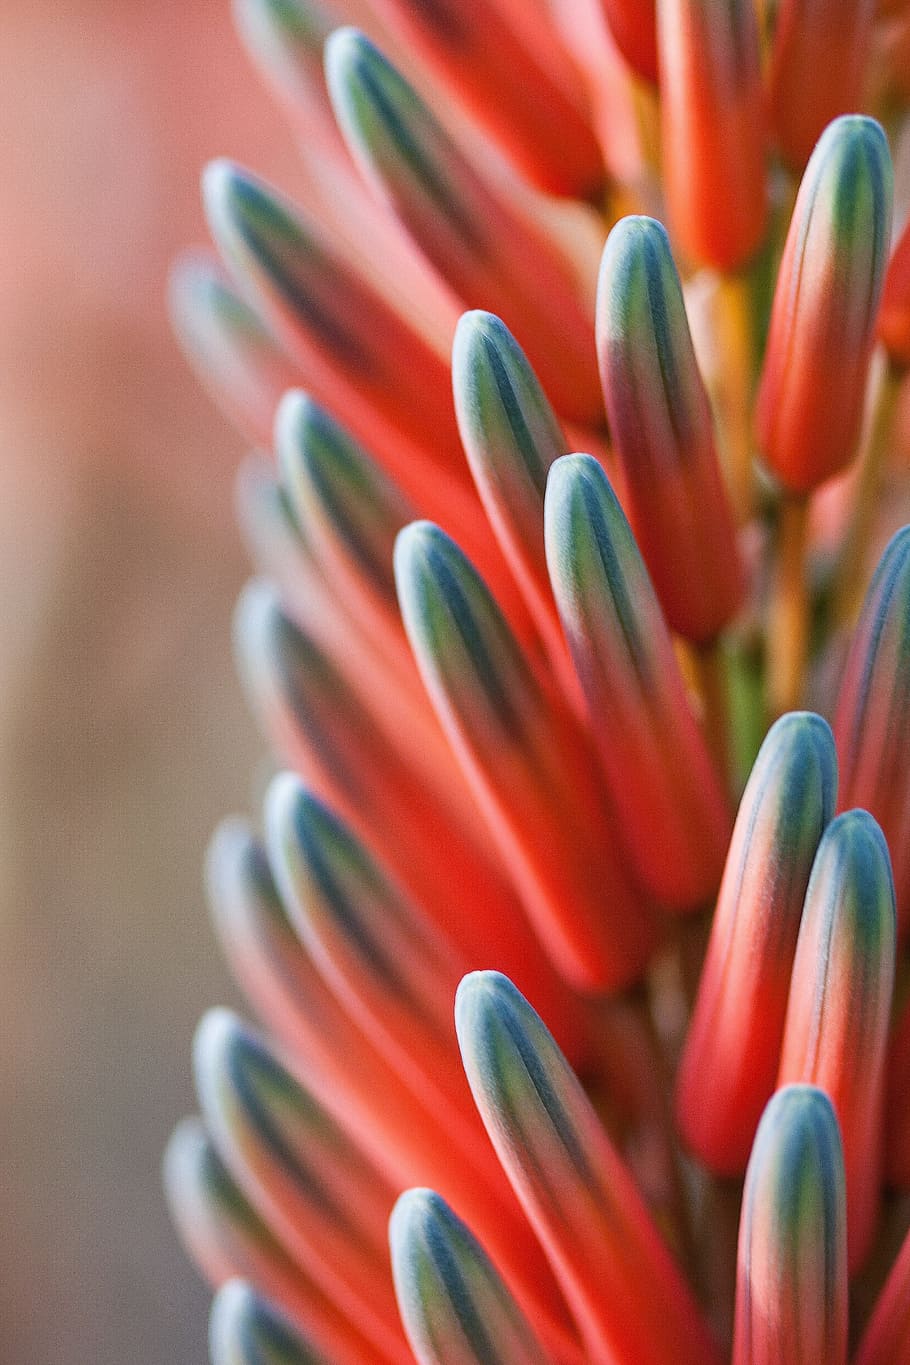 pink, blue, green, plant close-up photo, closeup photography, orange, teal, plant, flower, tender